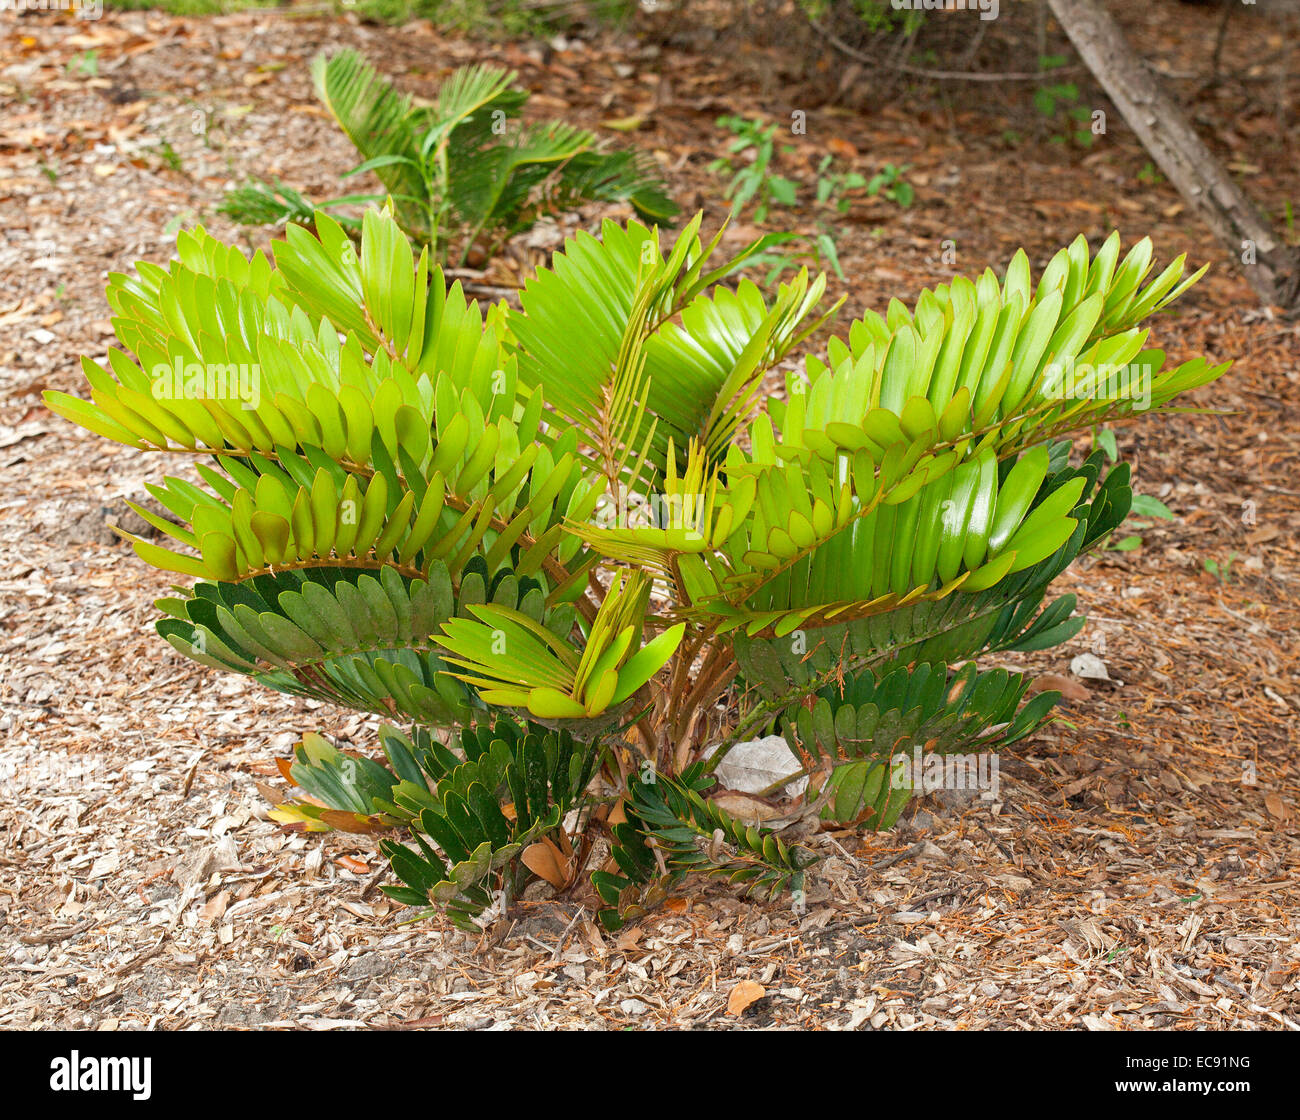 Cardboard plant, Zamia furfuracea, a cycad with vivid emerald foliage with background of light brown leaf mulch Stock Photo